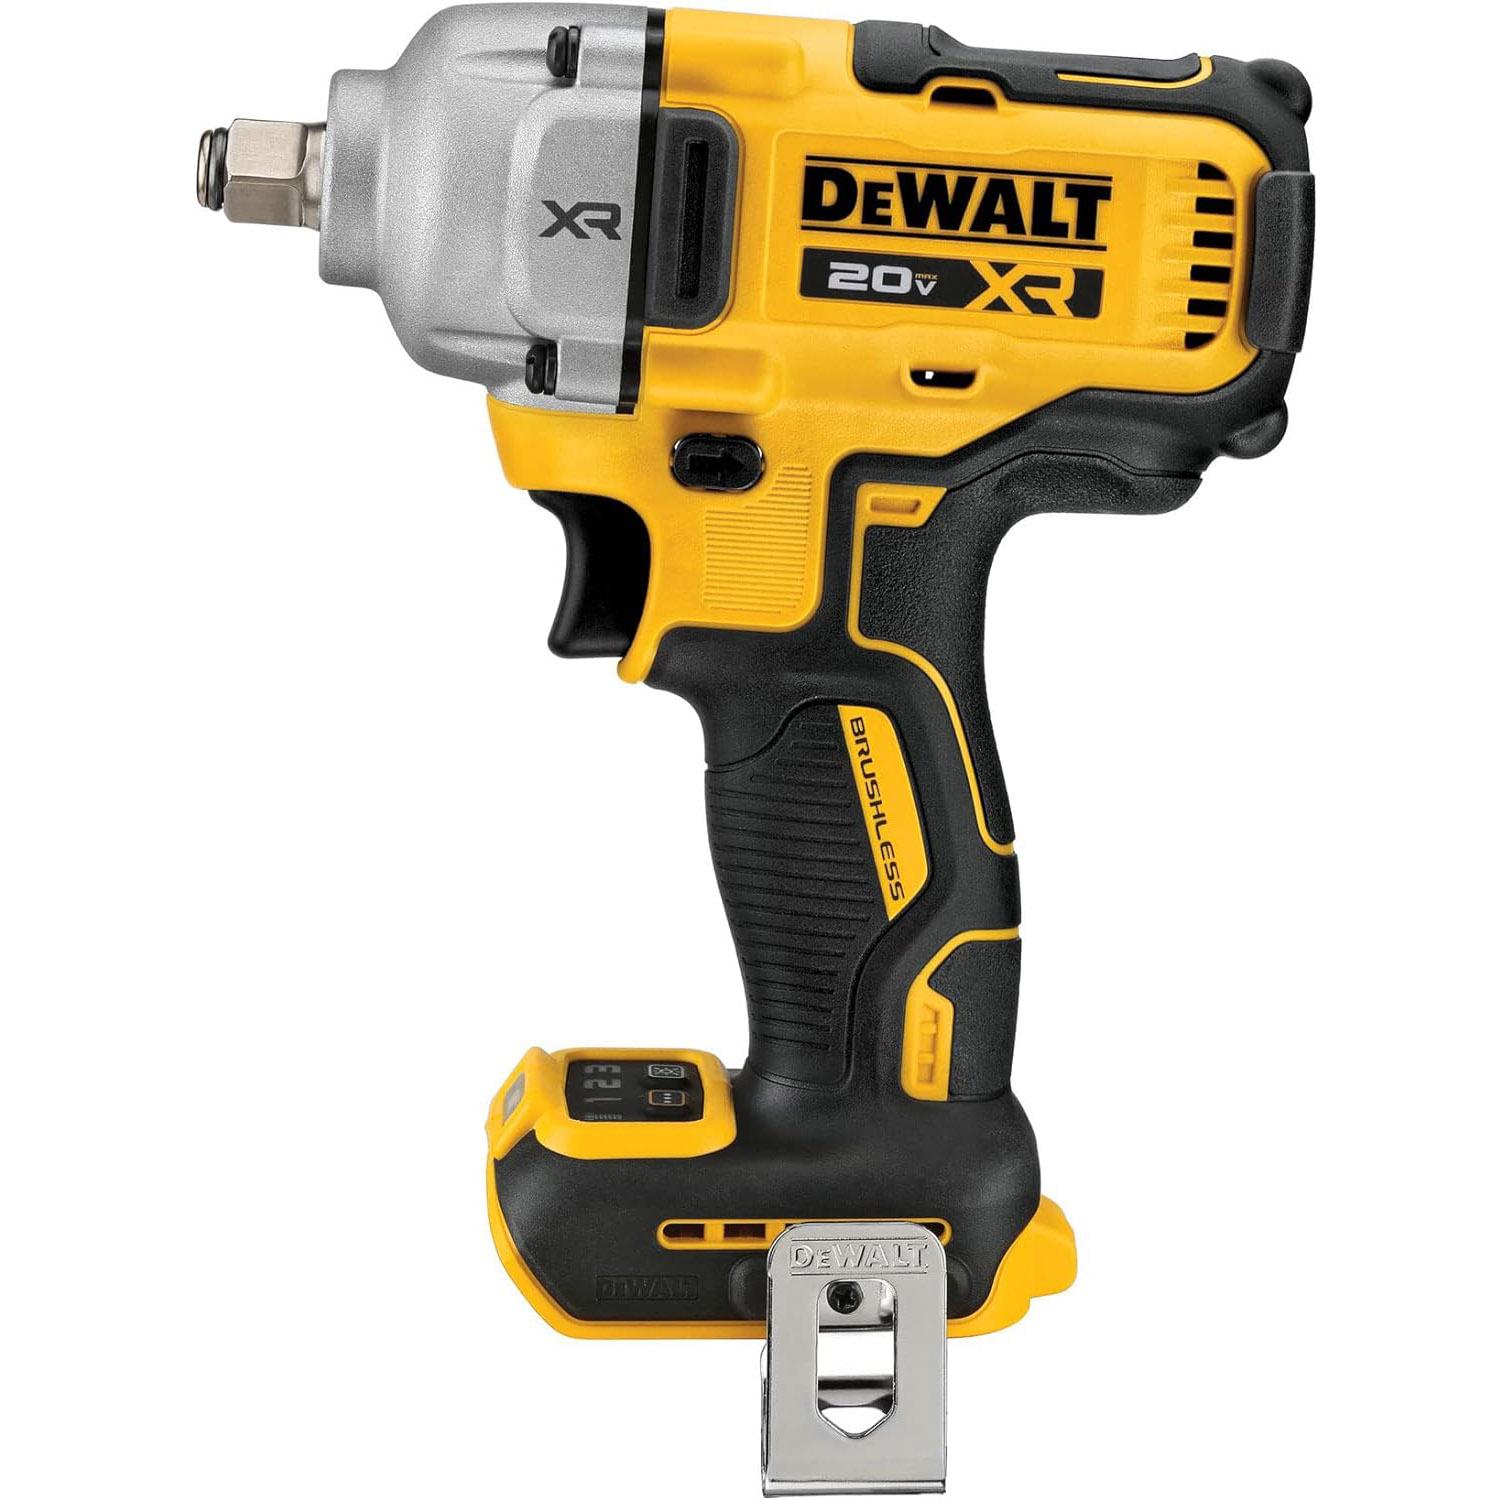 DeWALT XR 20V Max Variable Speed Brushless Cordless Impact Wrench for $169.30 Shipped